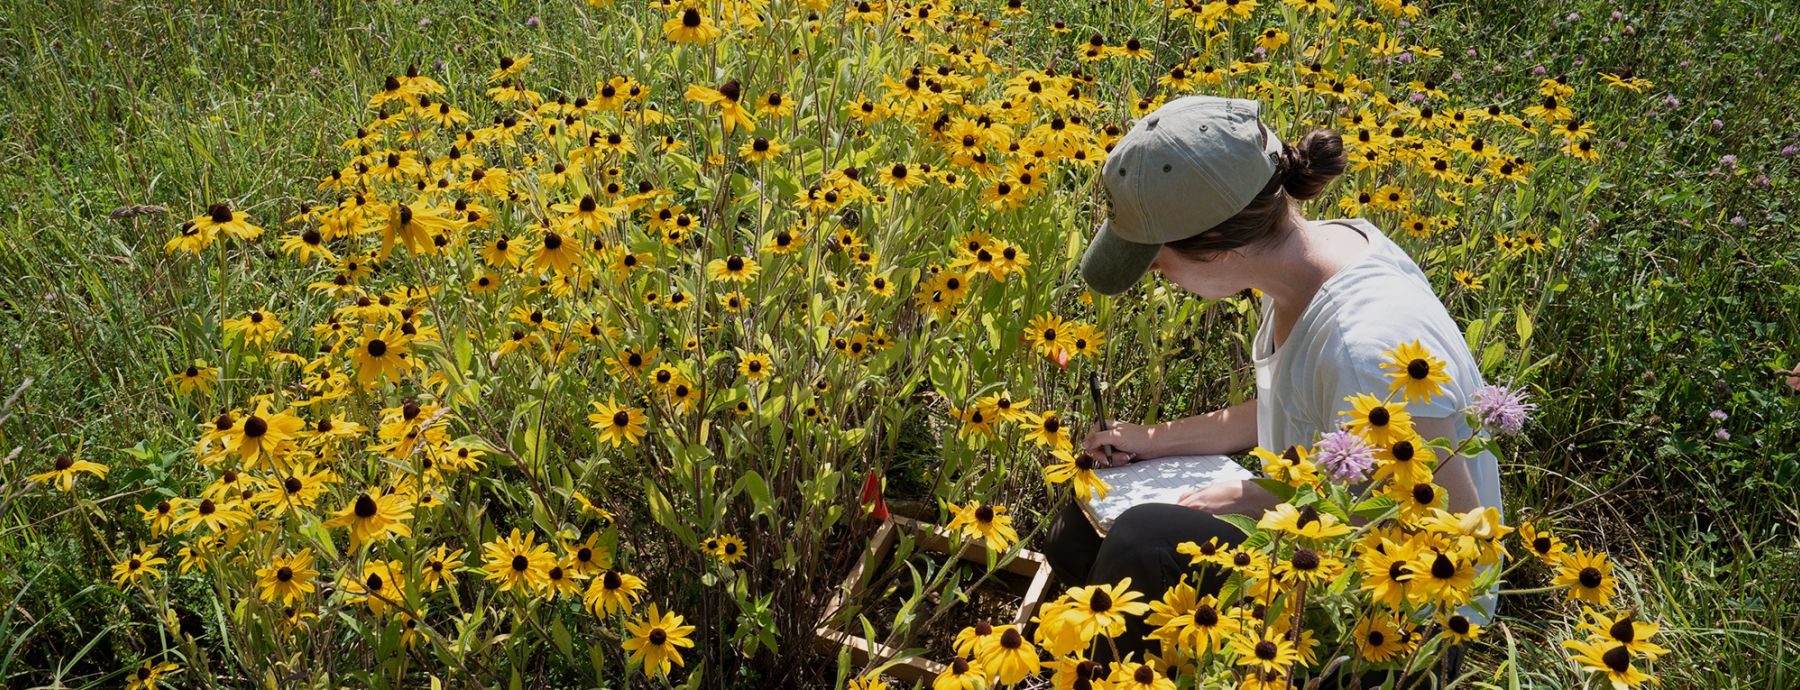 Student working in field